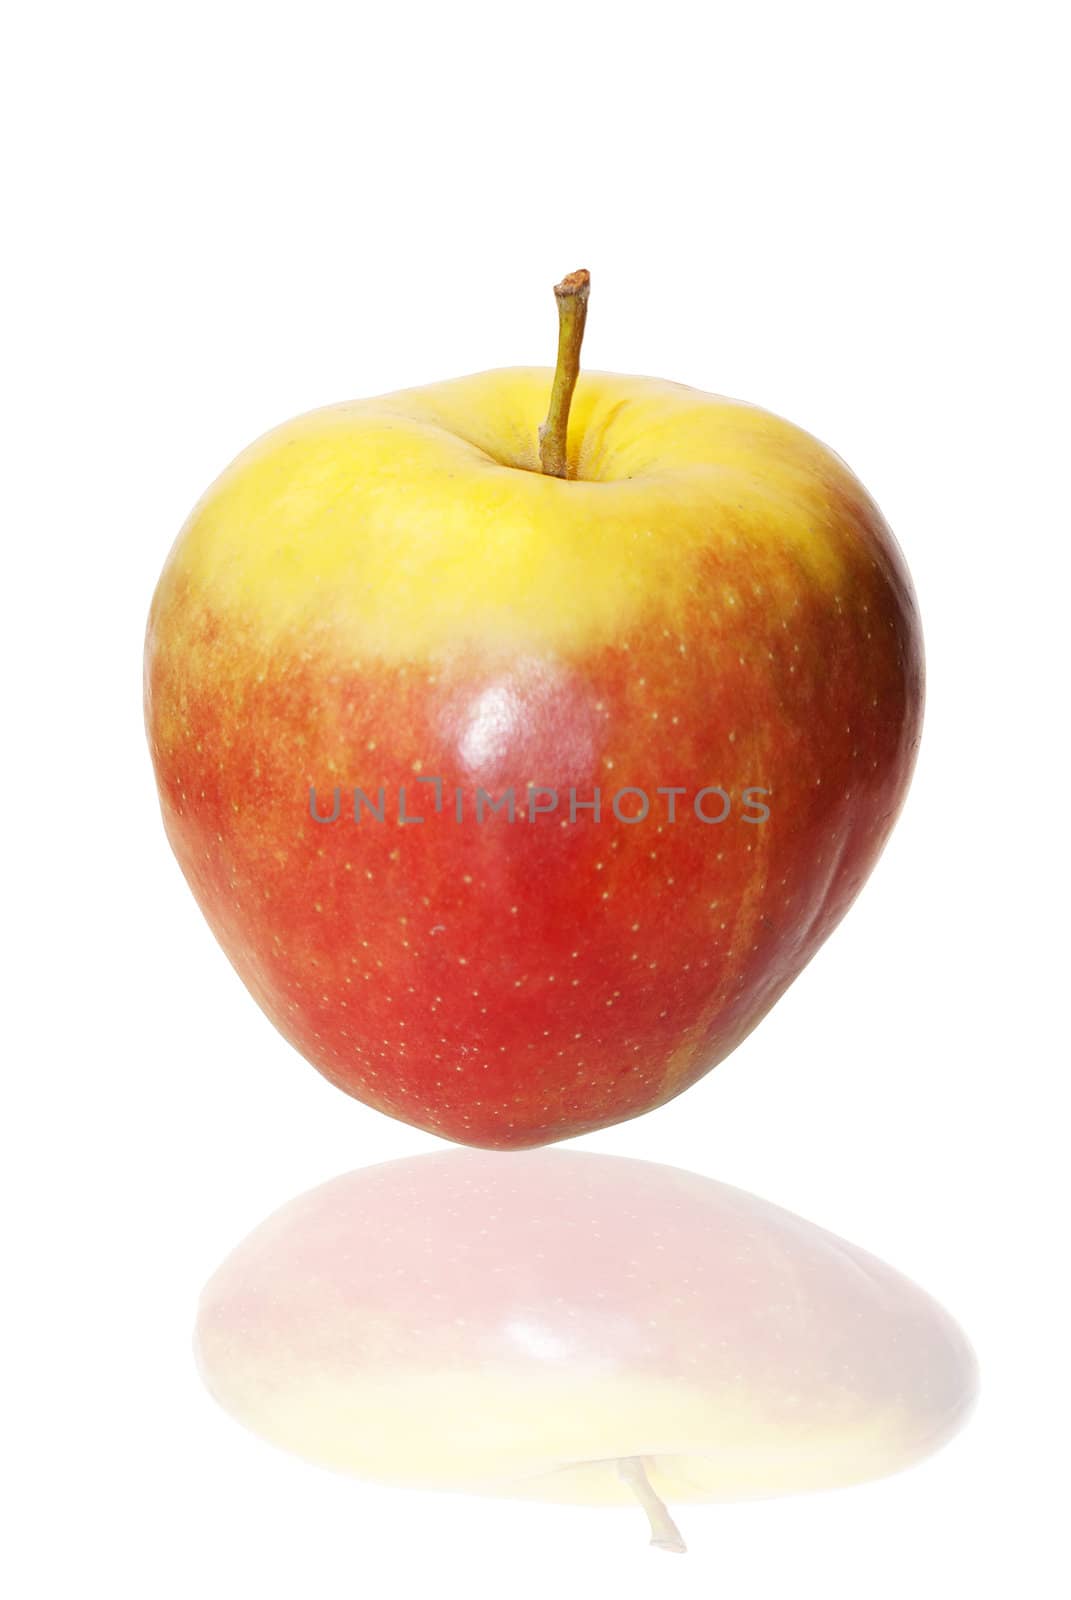 The apple over white background